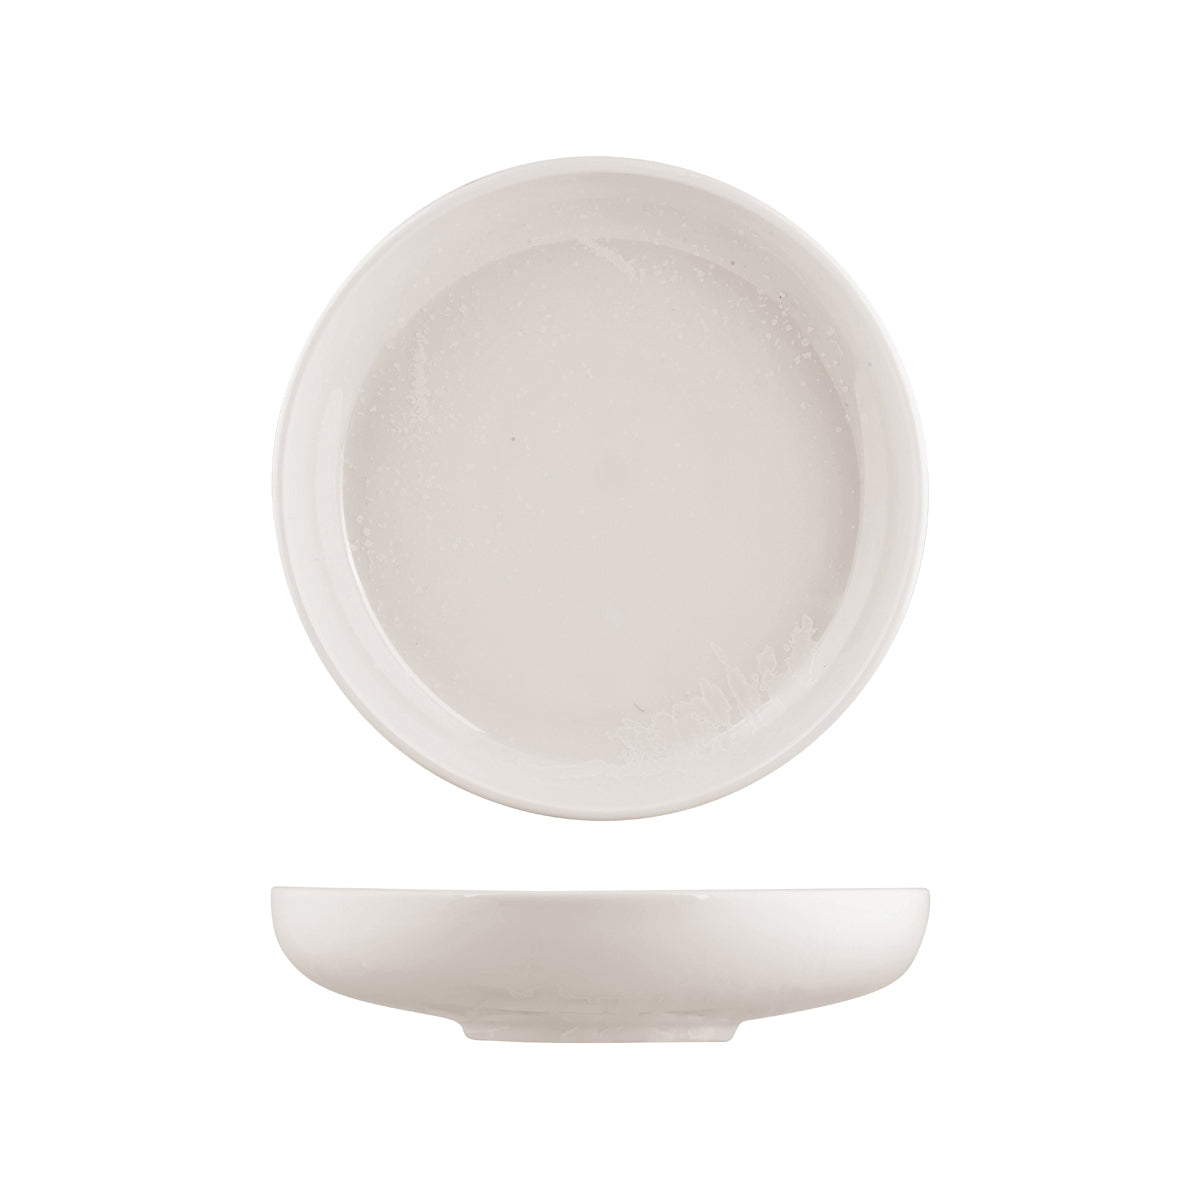 Share Bowl - 245mm, Snow, Moda Porcelain from Moda Porcelain. made out of Porcelain and sold in boxes of 4. Hospitality quality at wholesale price with The Flying Fork! 